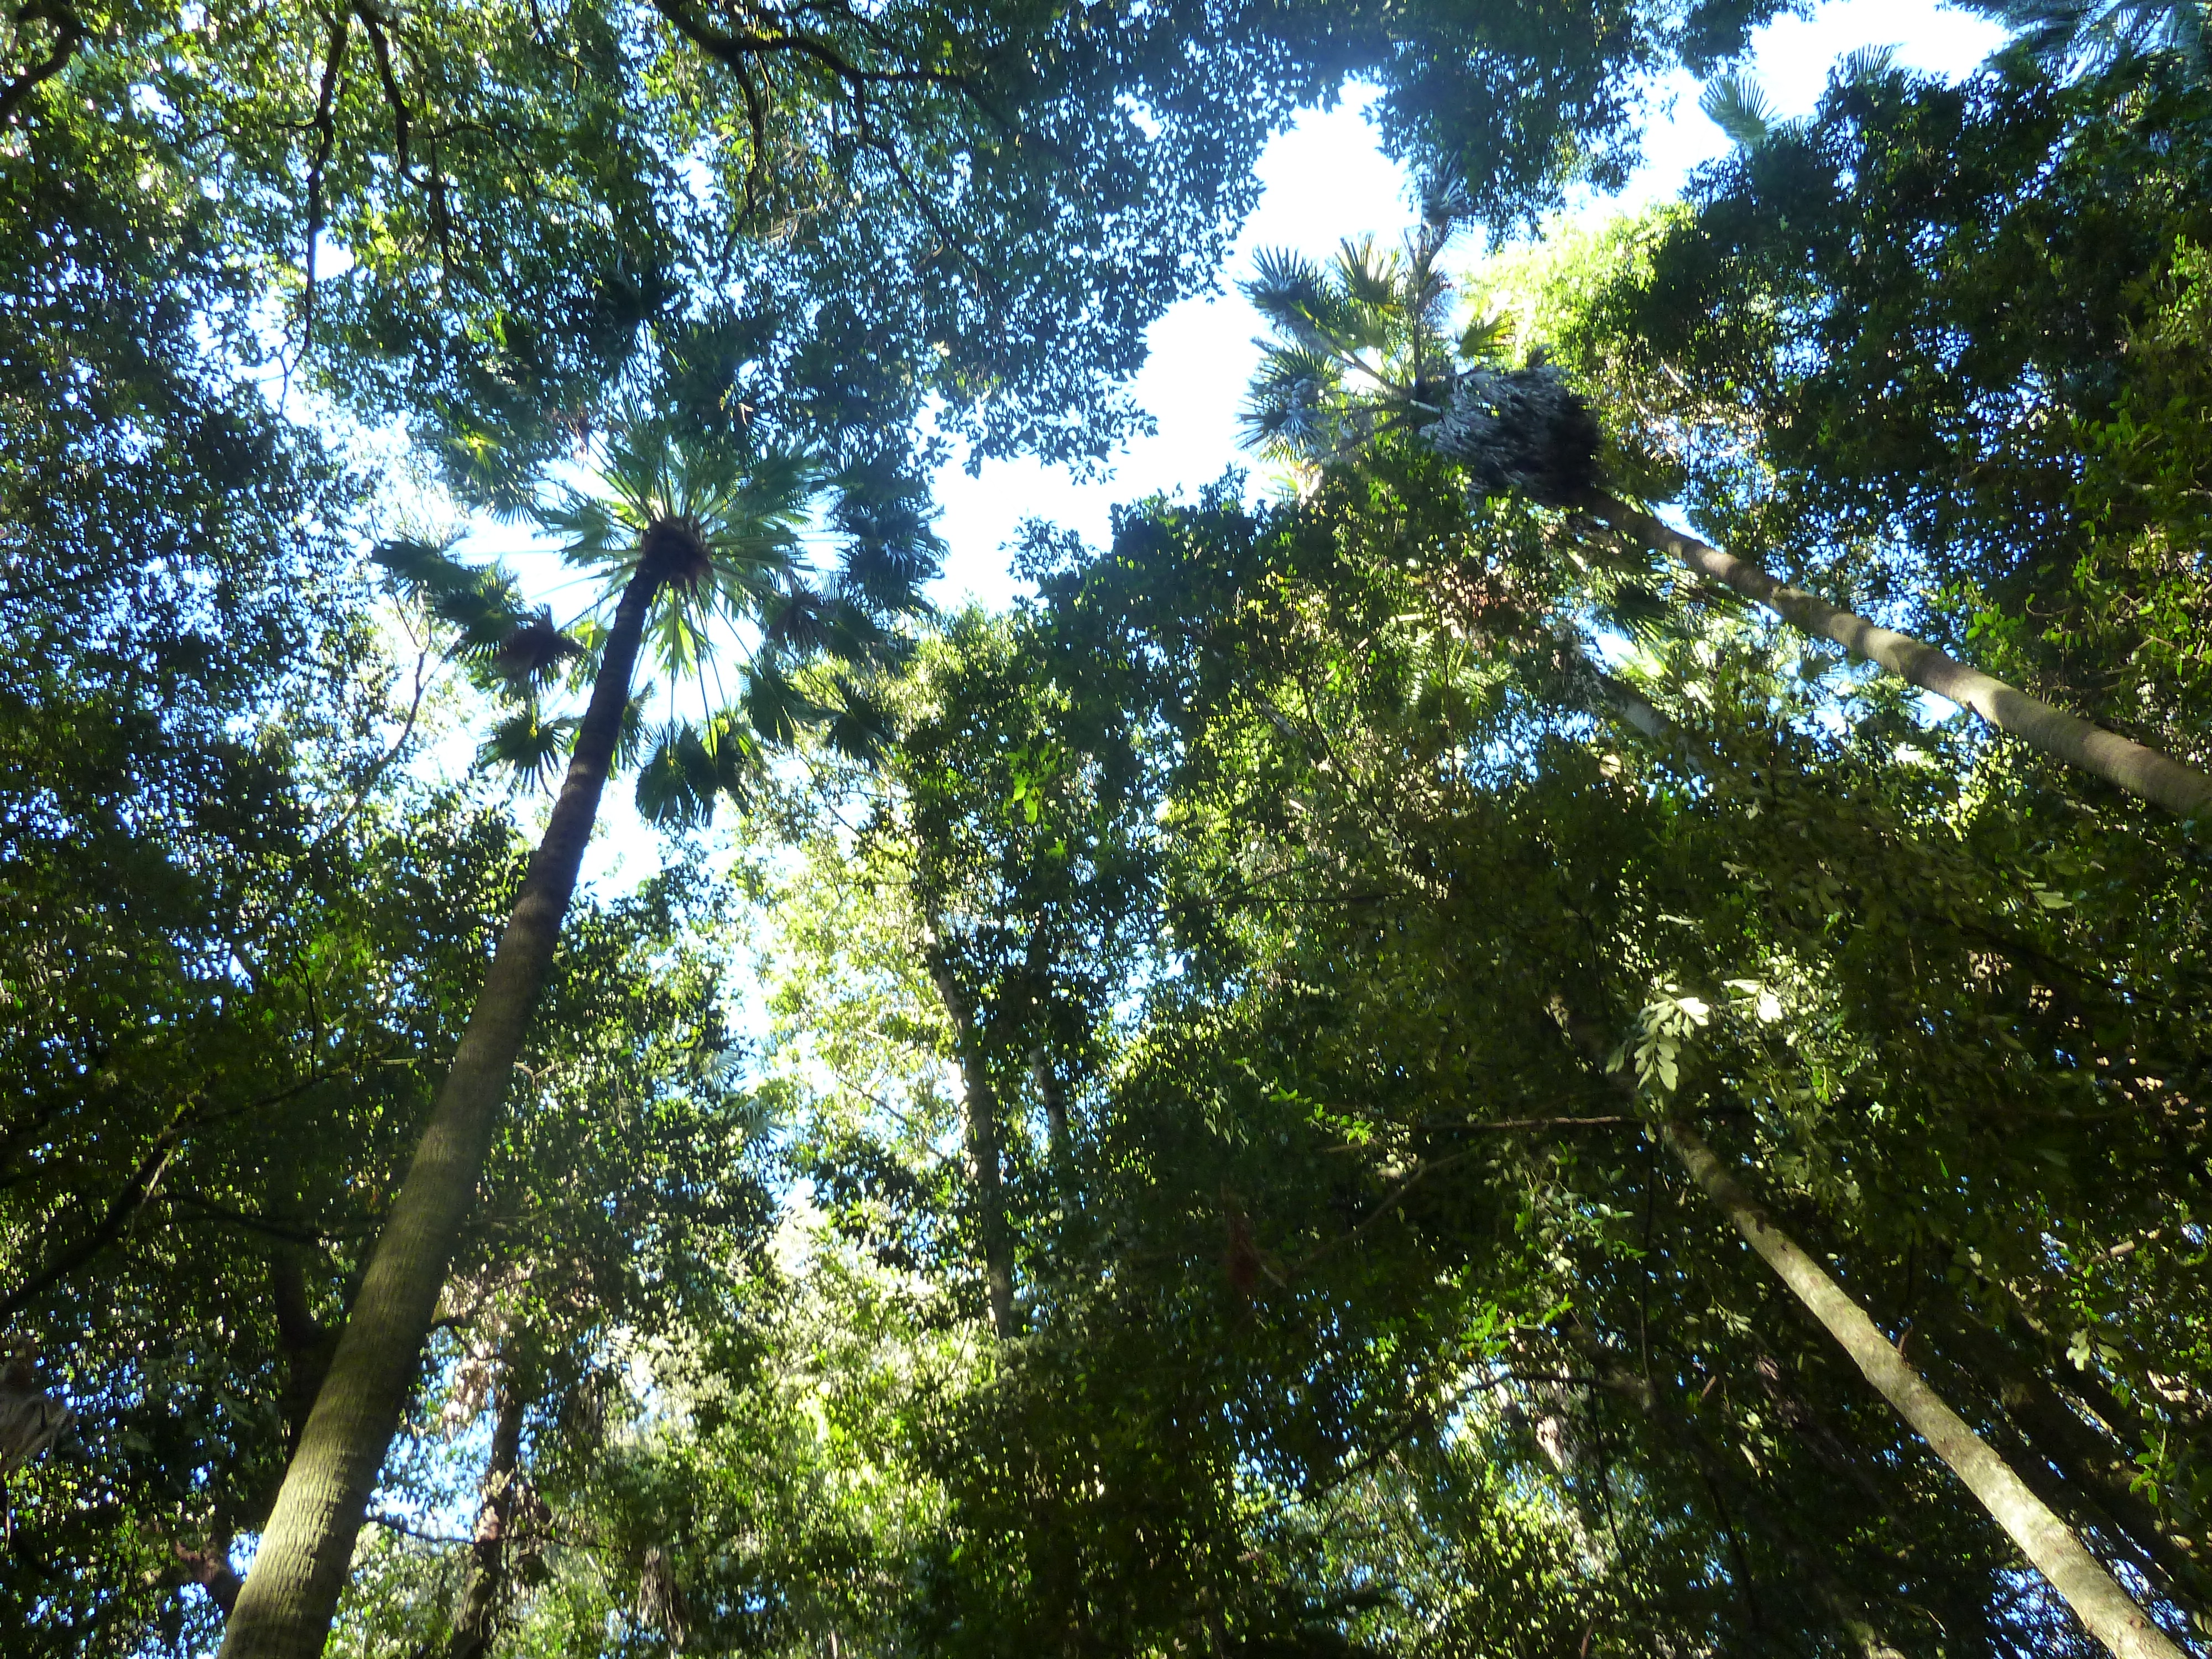 Looking up at trees from the ground to see how much of the sky and light is blocked out by the thick canopy.